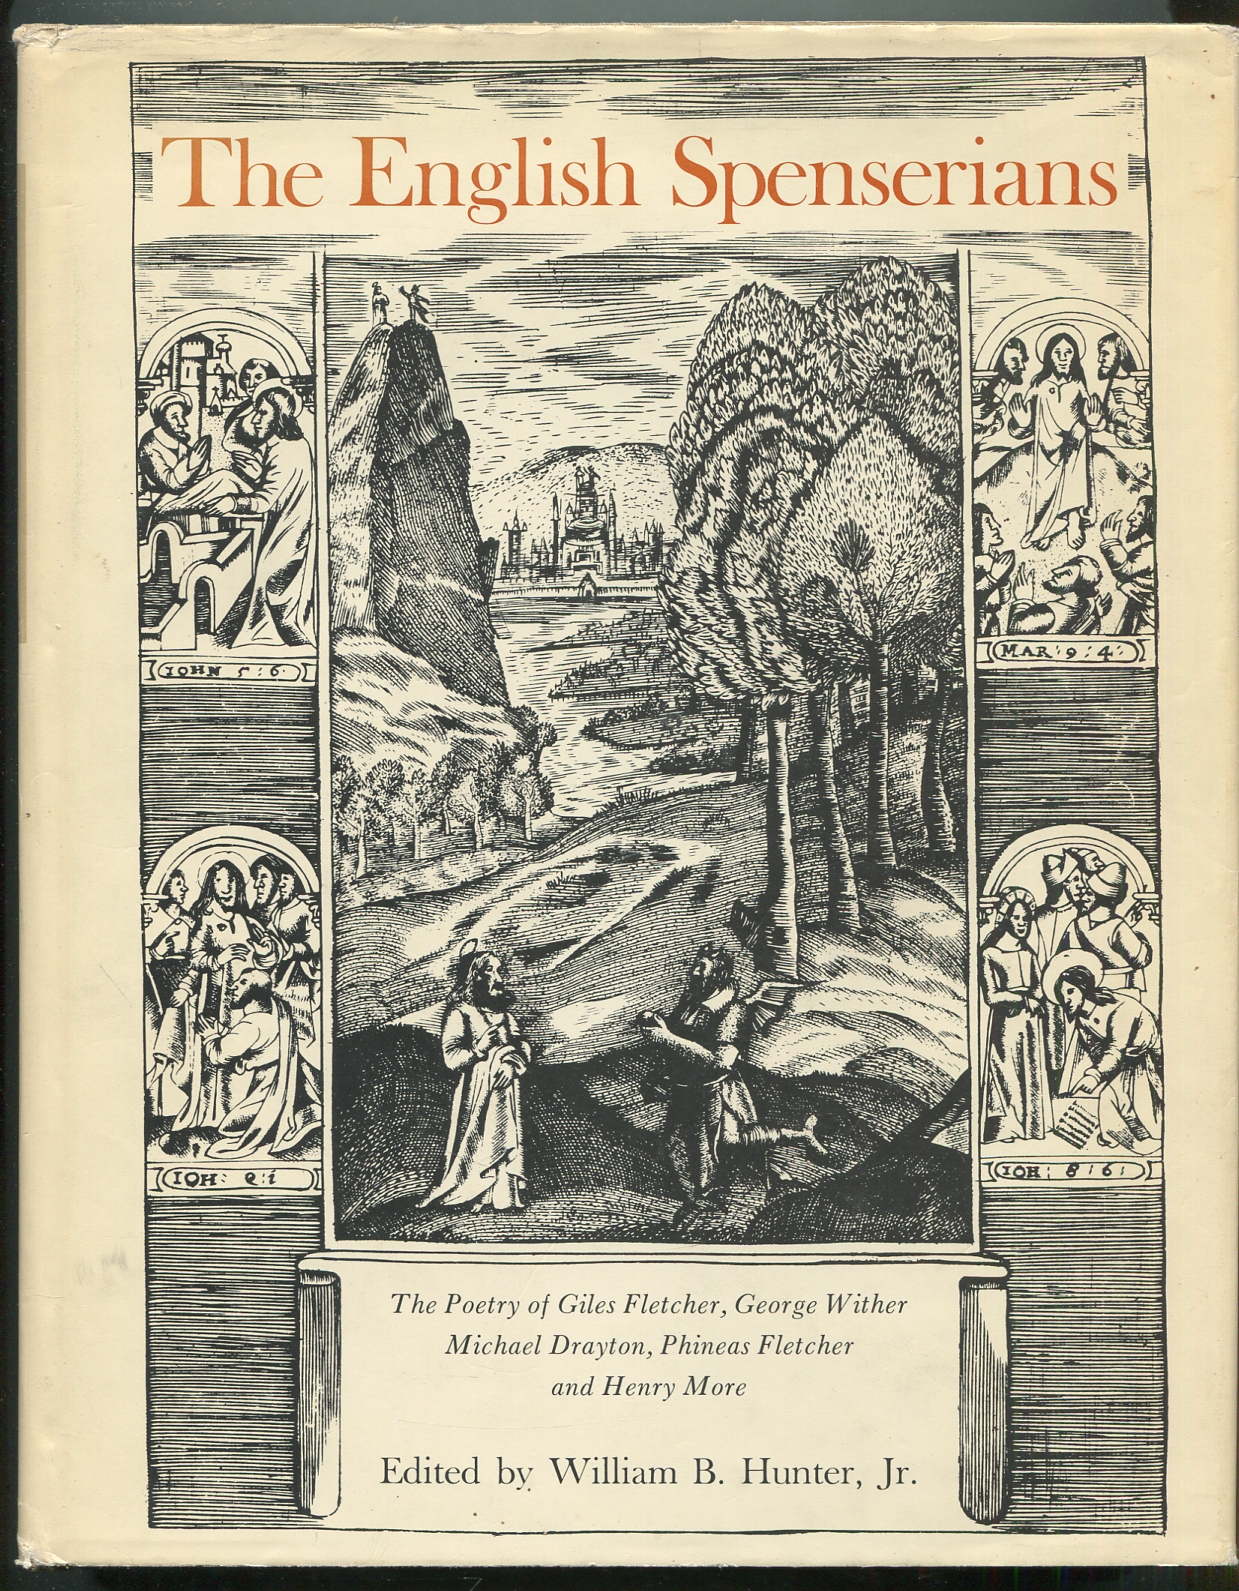 The English Spenserians: The Poetry of Giles Fletcher, George Wither, Michael Drayton, Phineas Fletcher, and Henry More - HUNTER, William B., edited by